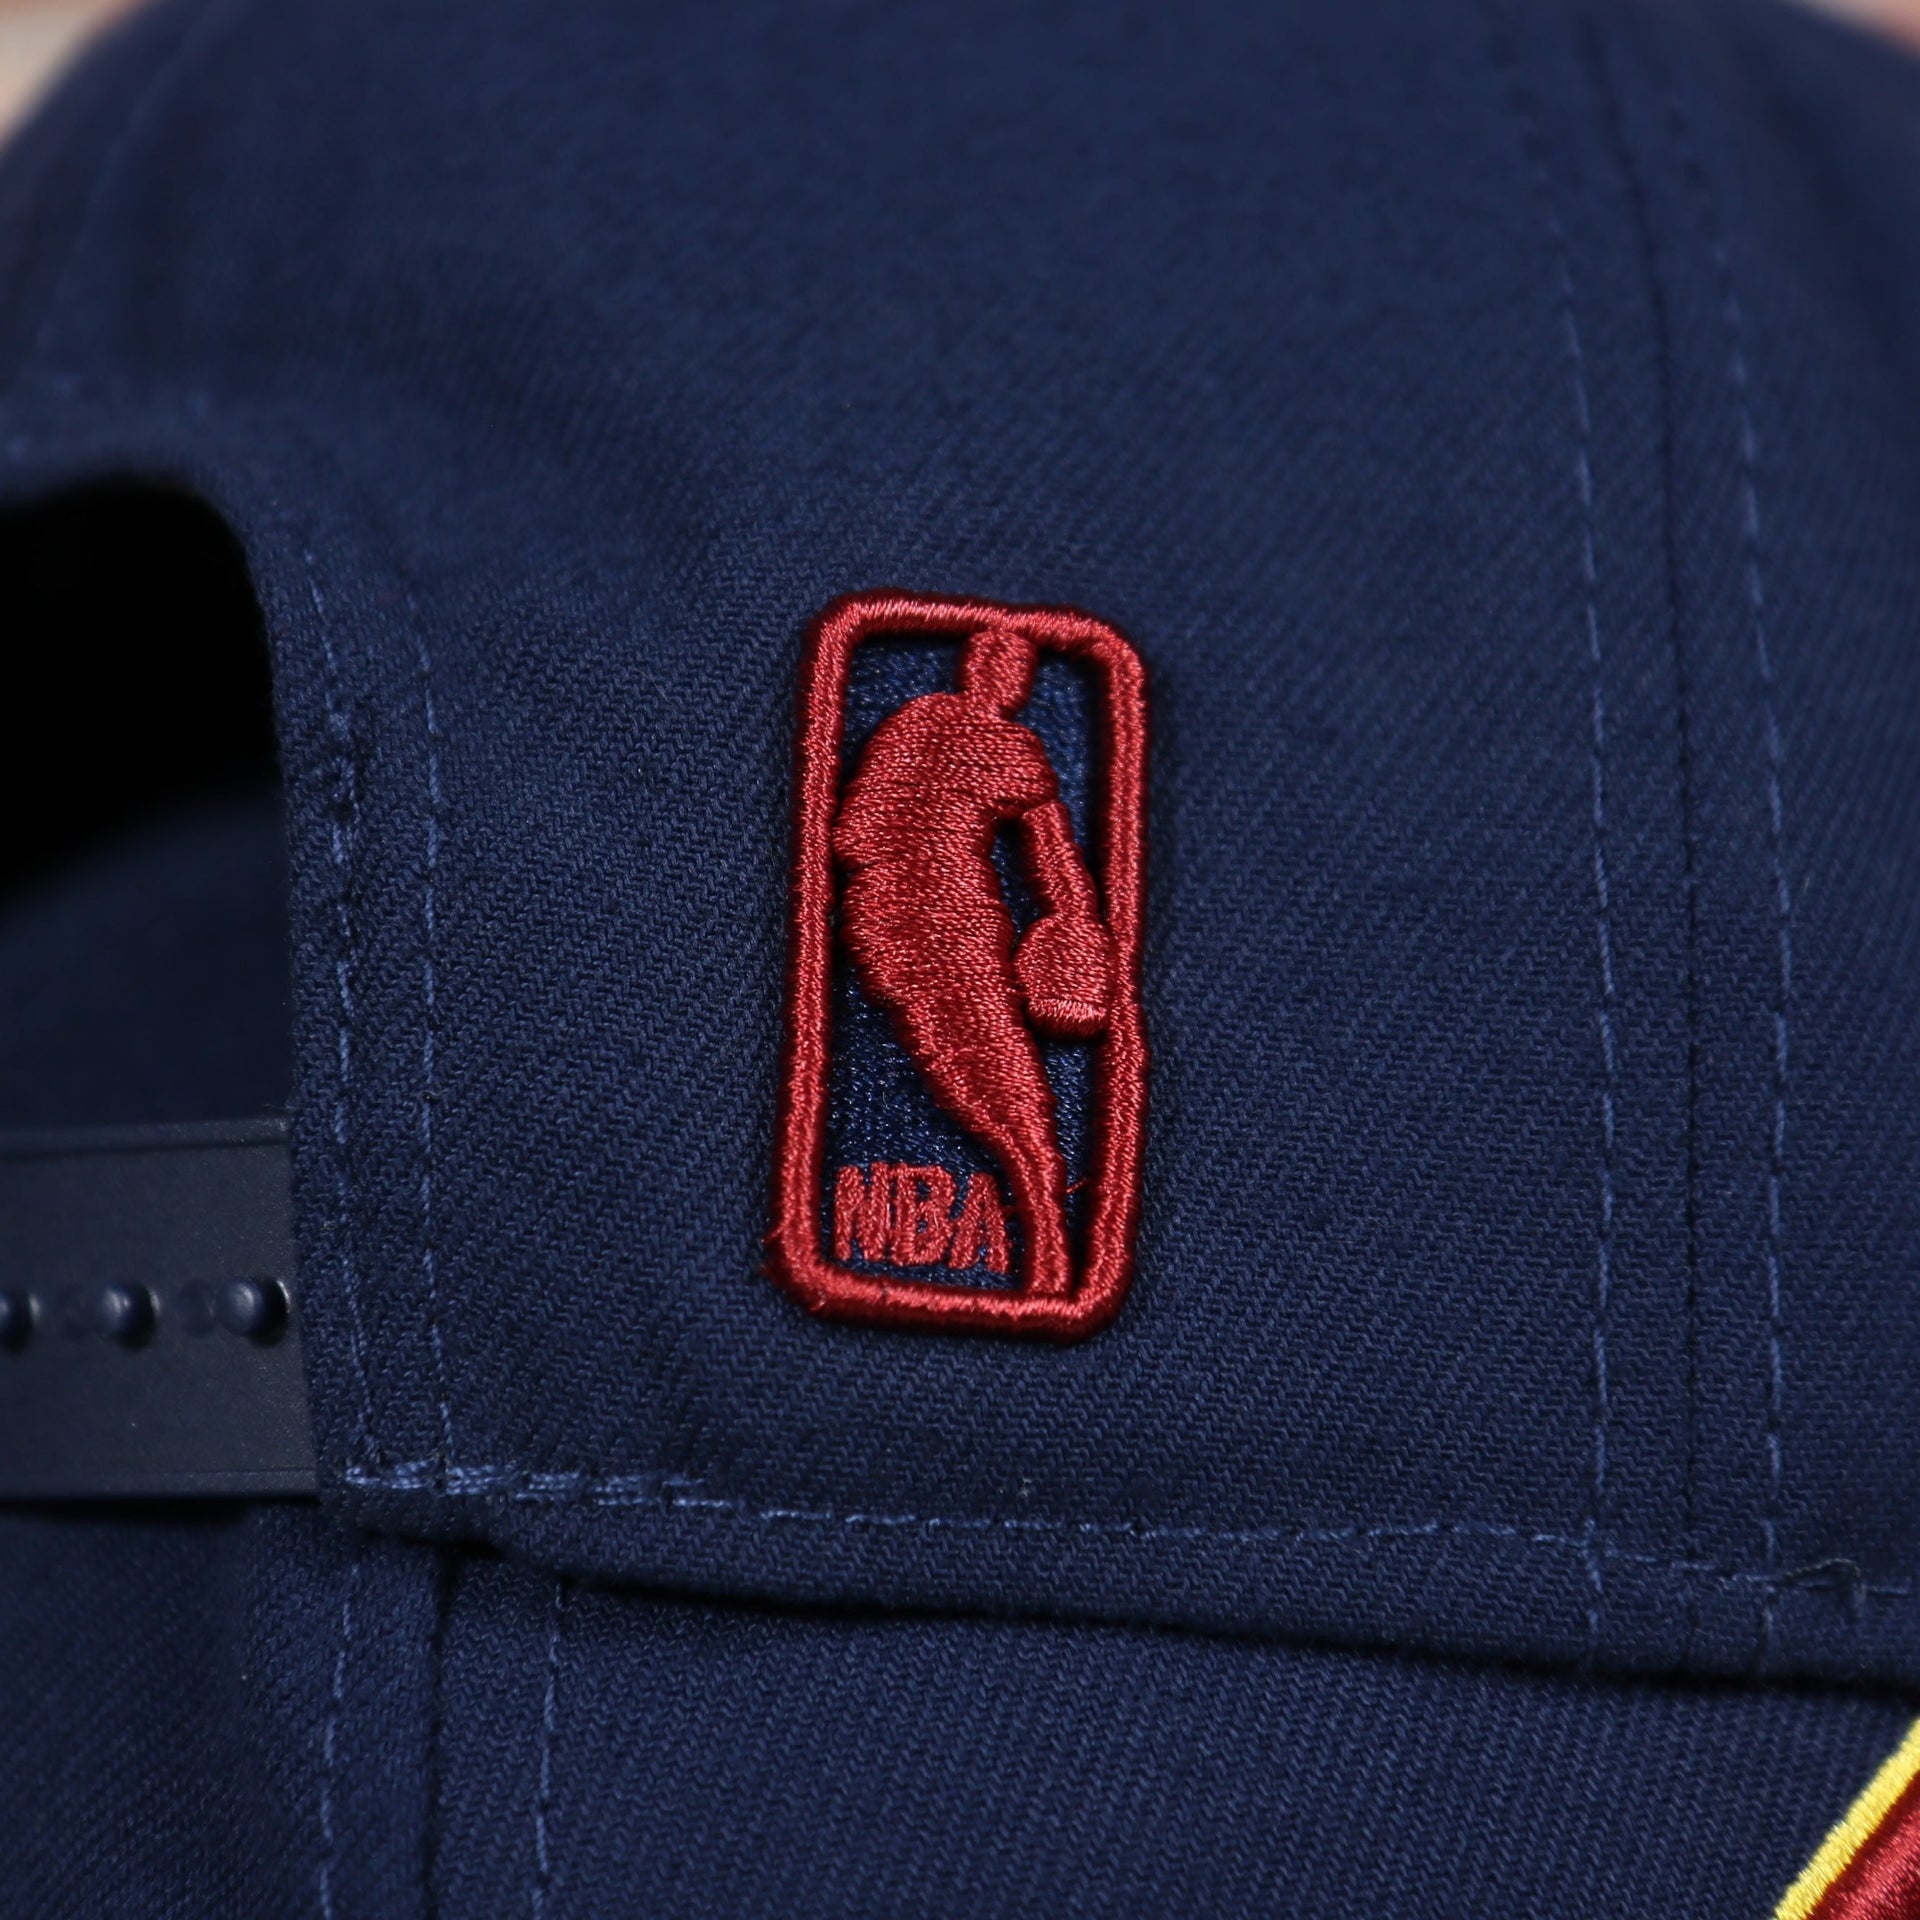 NBA logo on the Cleveland Cavaliers Classic Navy Blue Snapback Hat